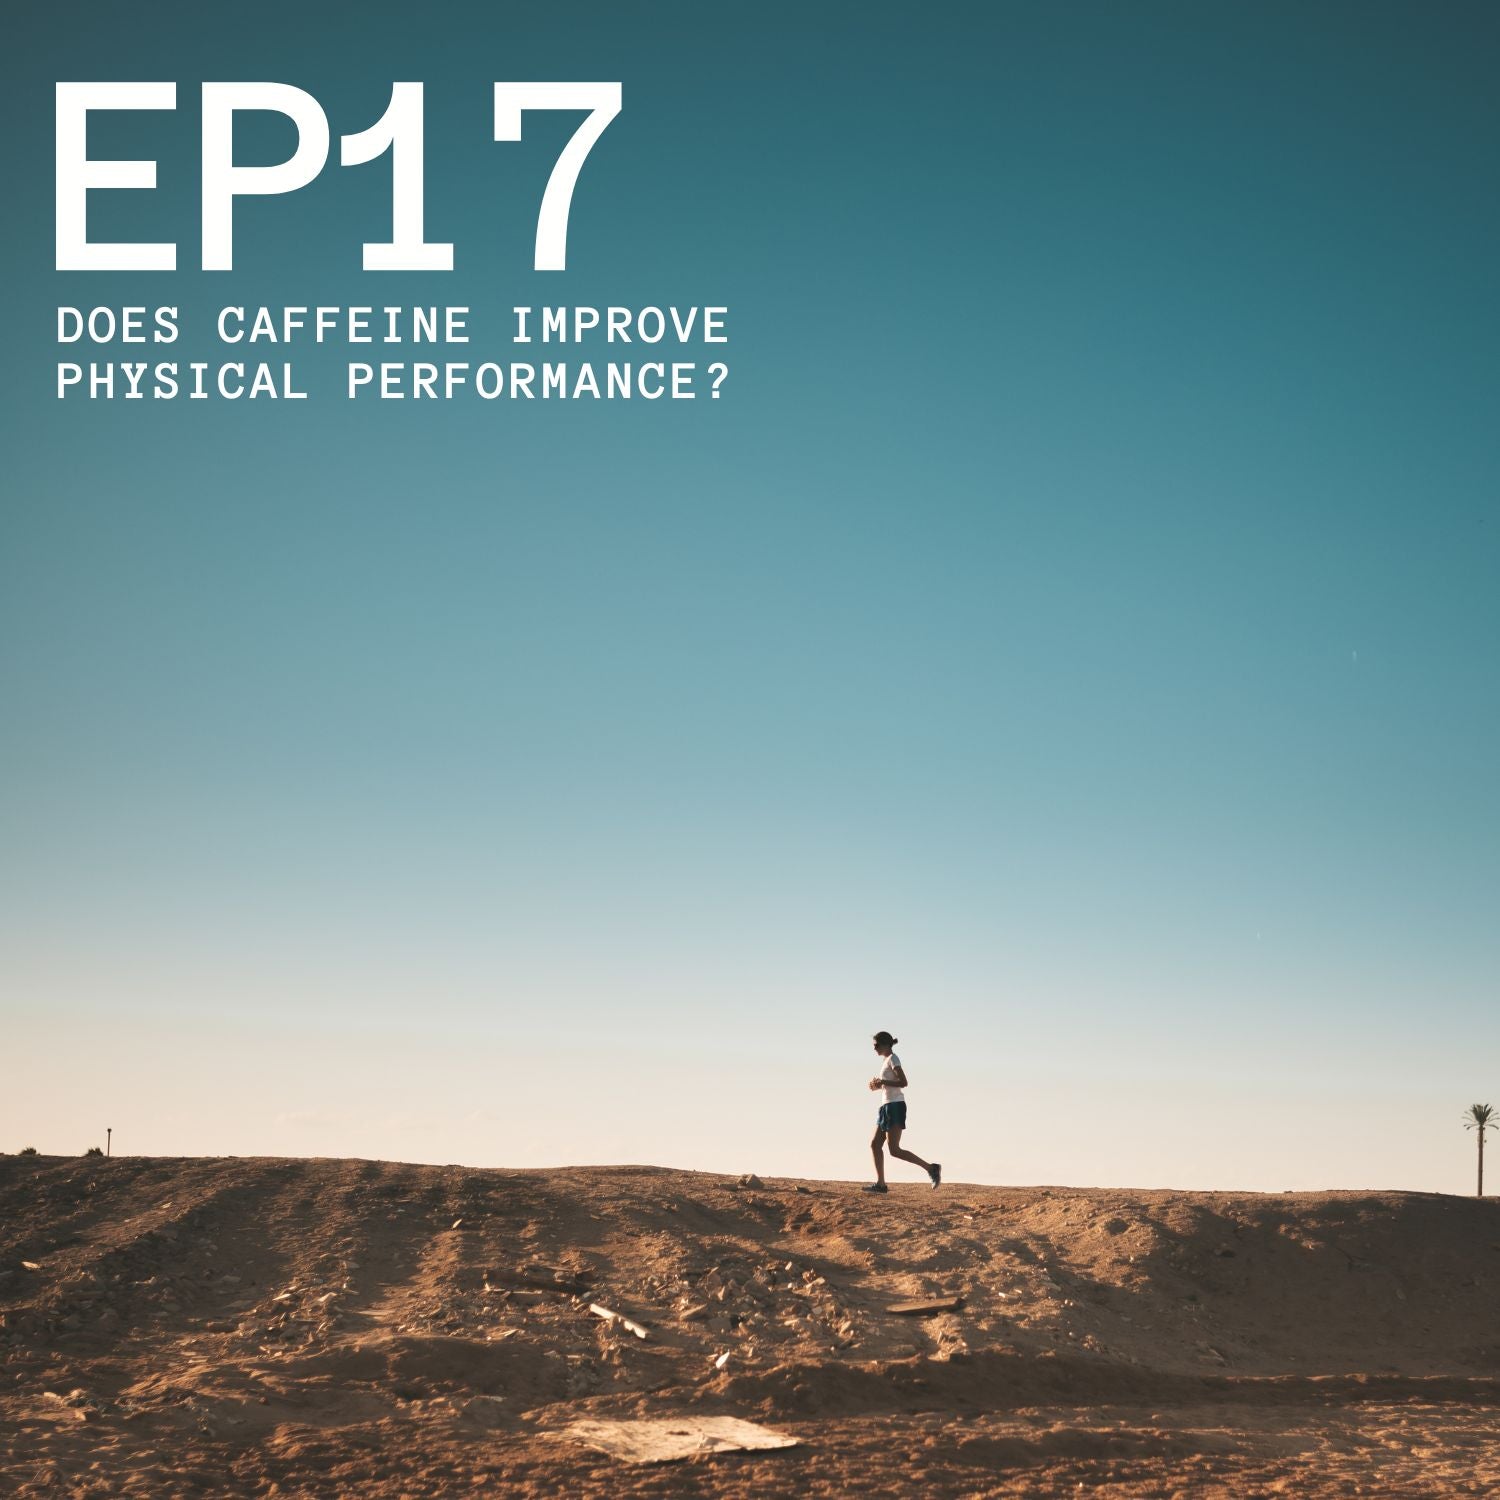 Episode 17 - Does Caffeine Improve Physical Performance?